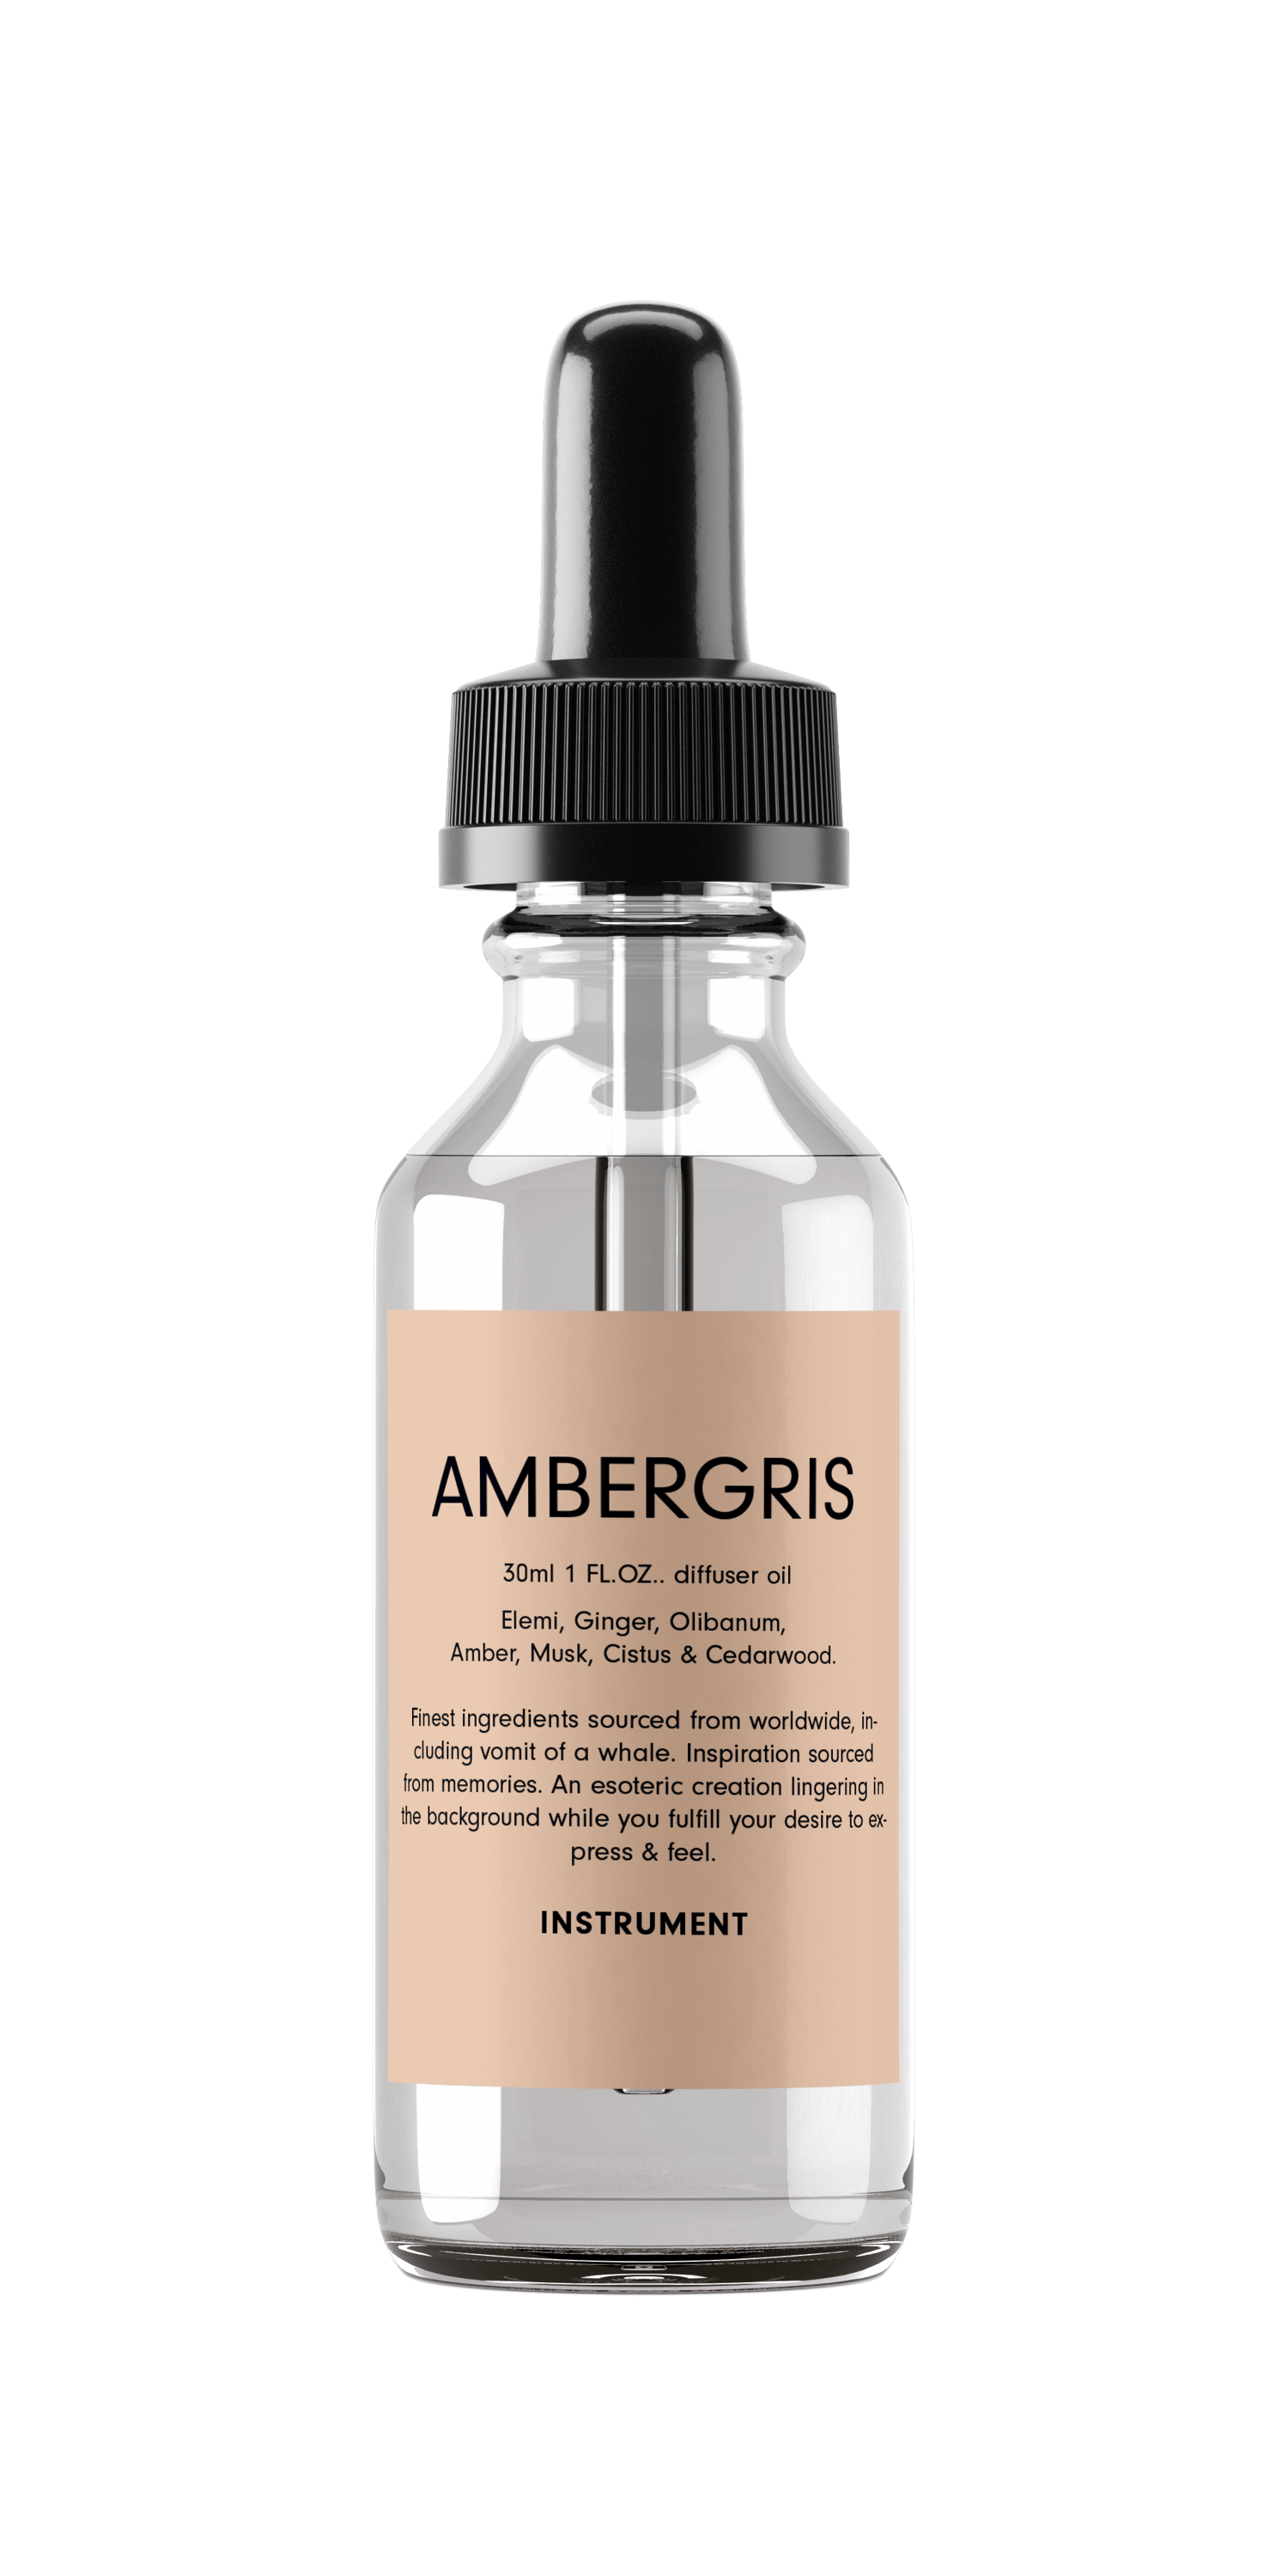 Image of Ambergris oil